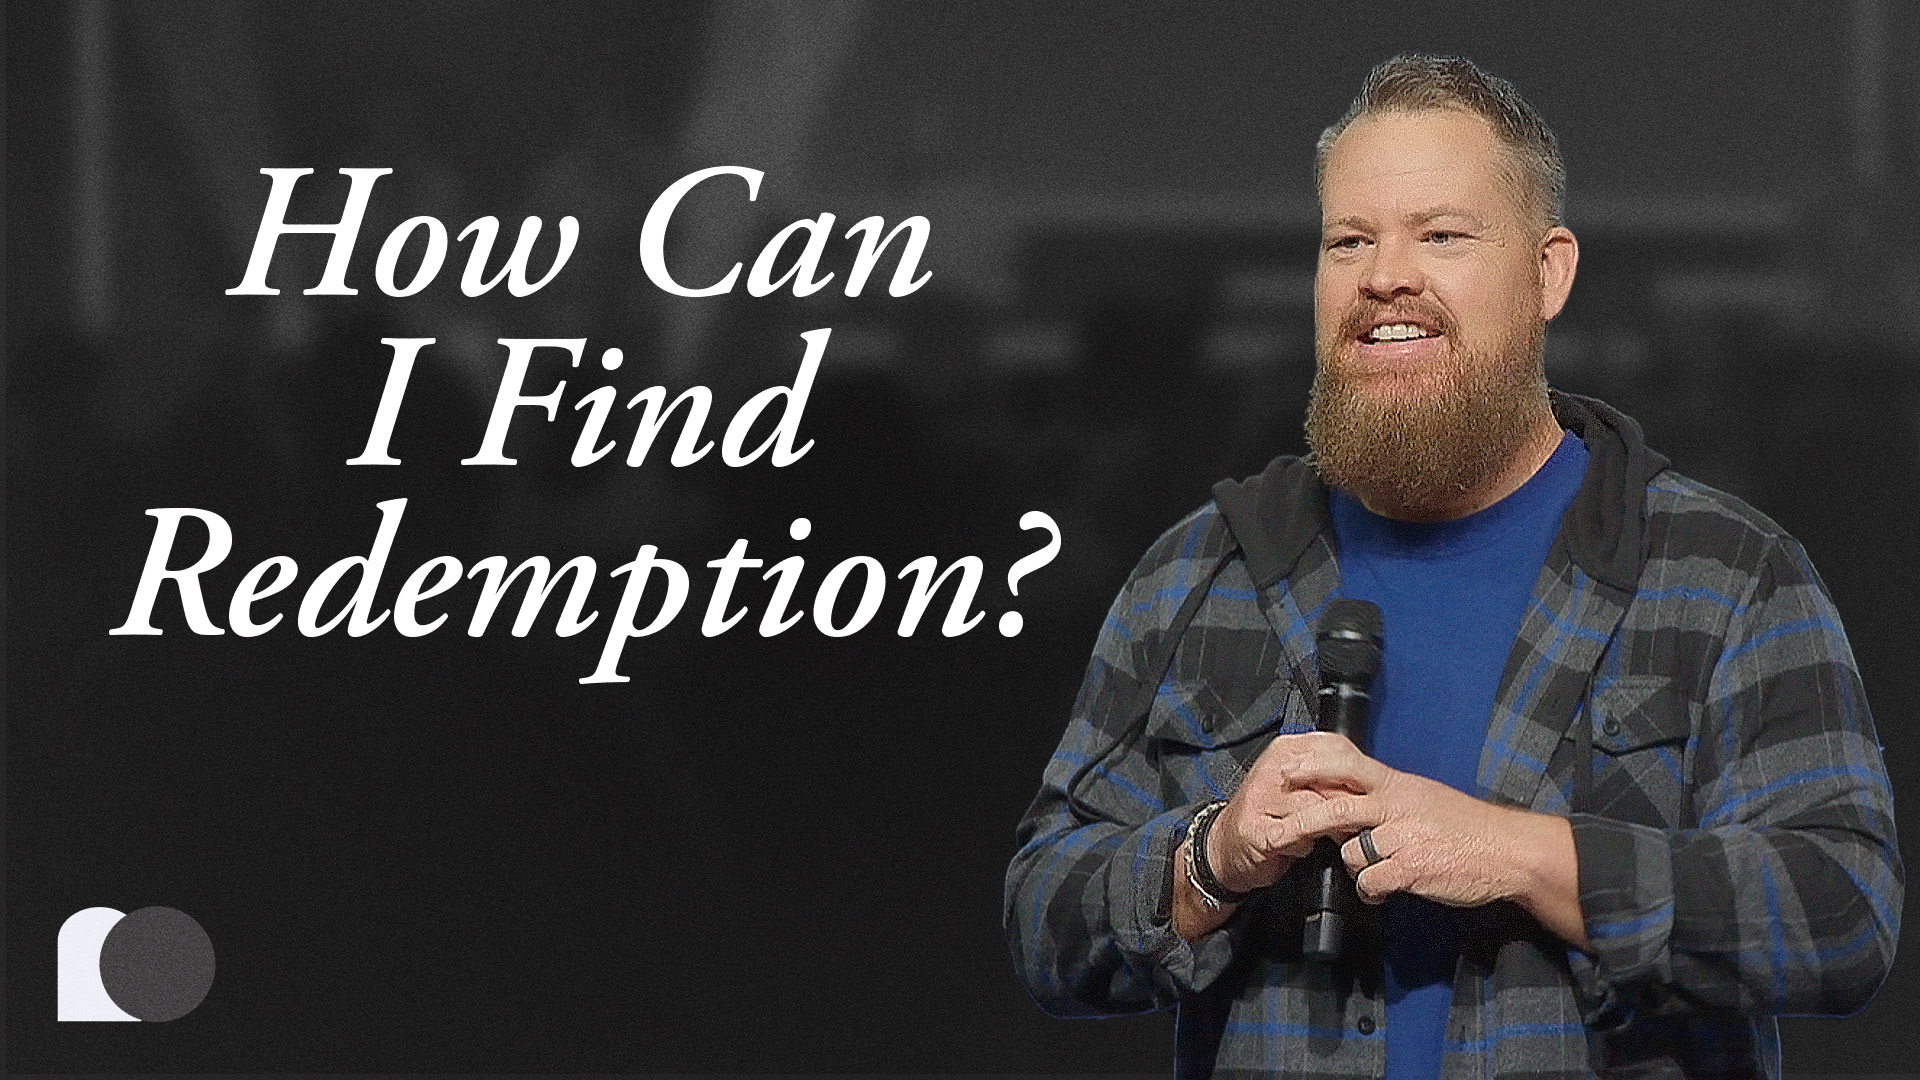 How Can I Find Redemption?